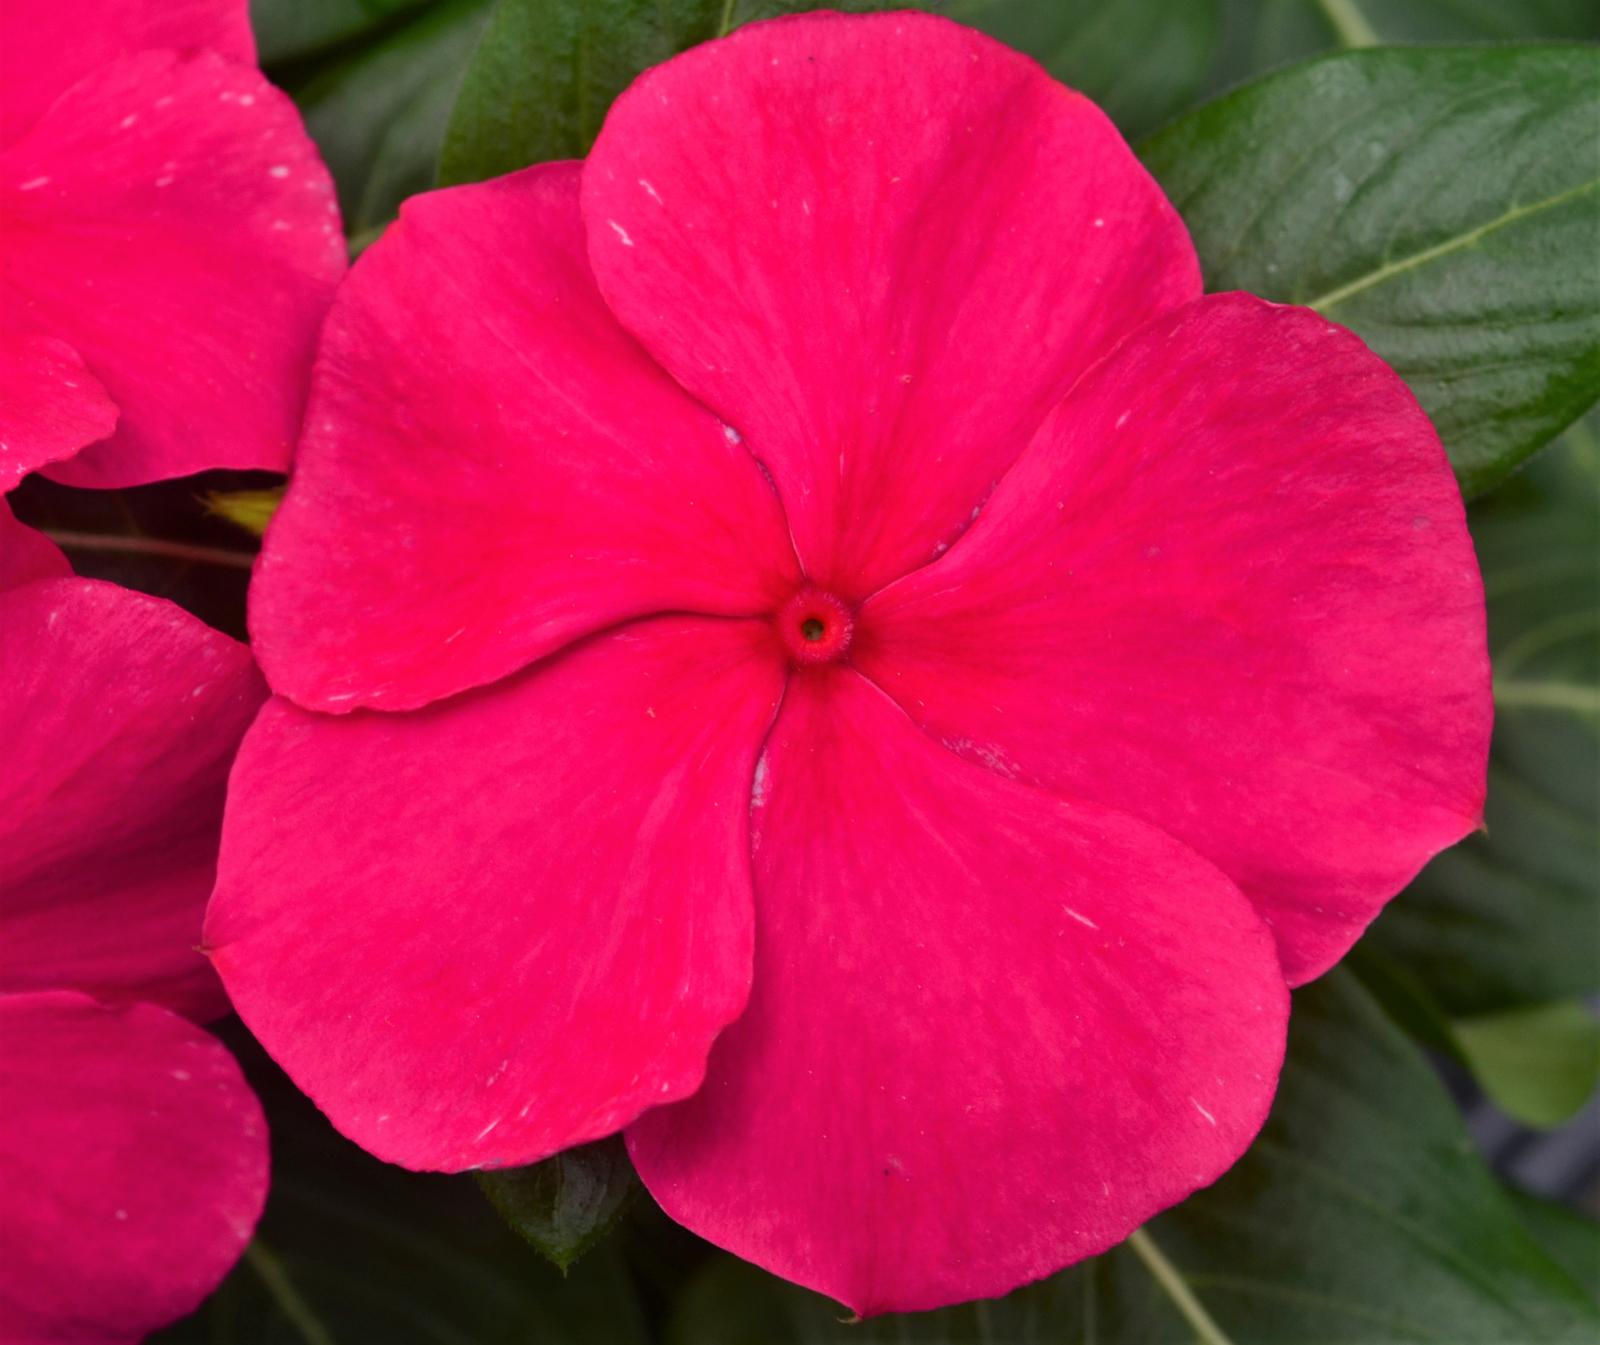 Catharanthus roseus Cora XDR 'Punch' - Vinca Cora XDR Punch from Hillcrest Nursery